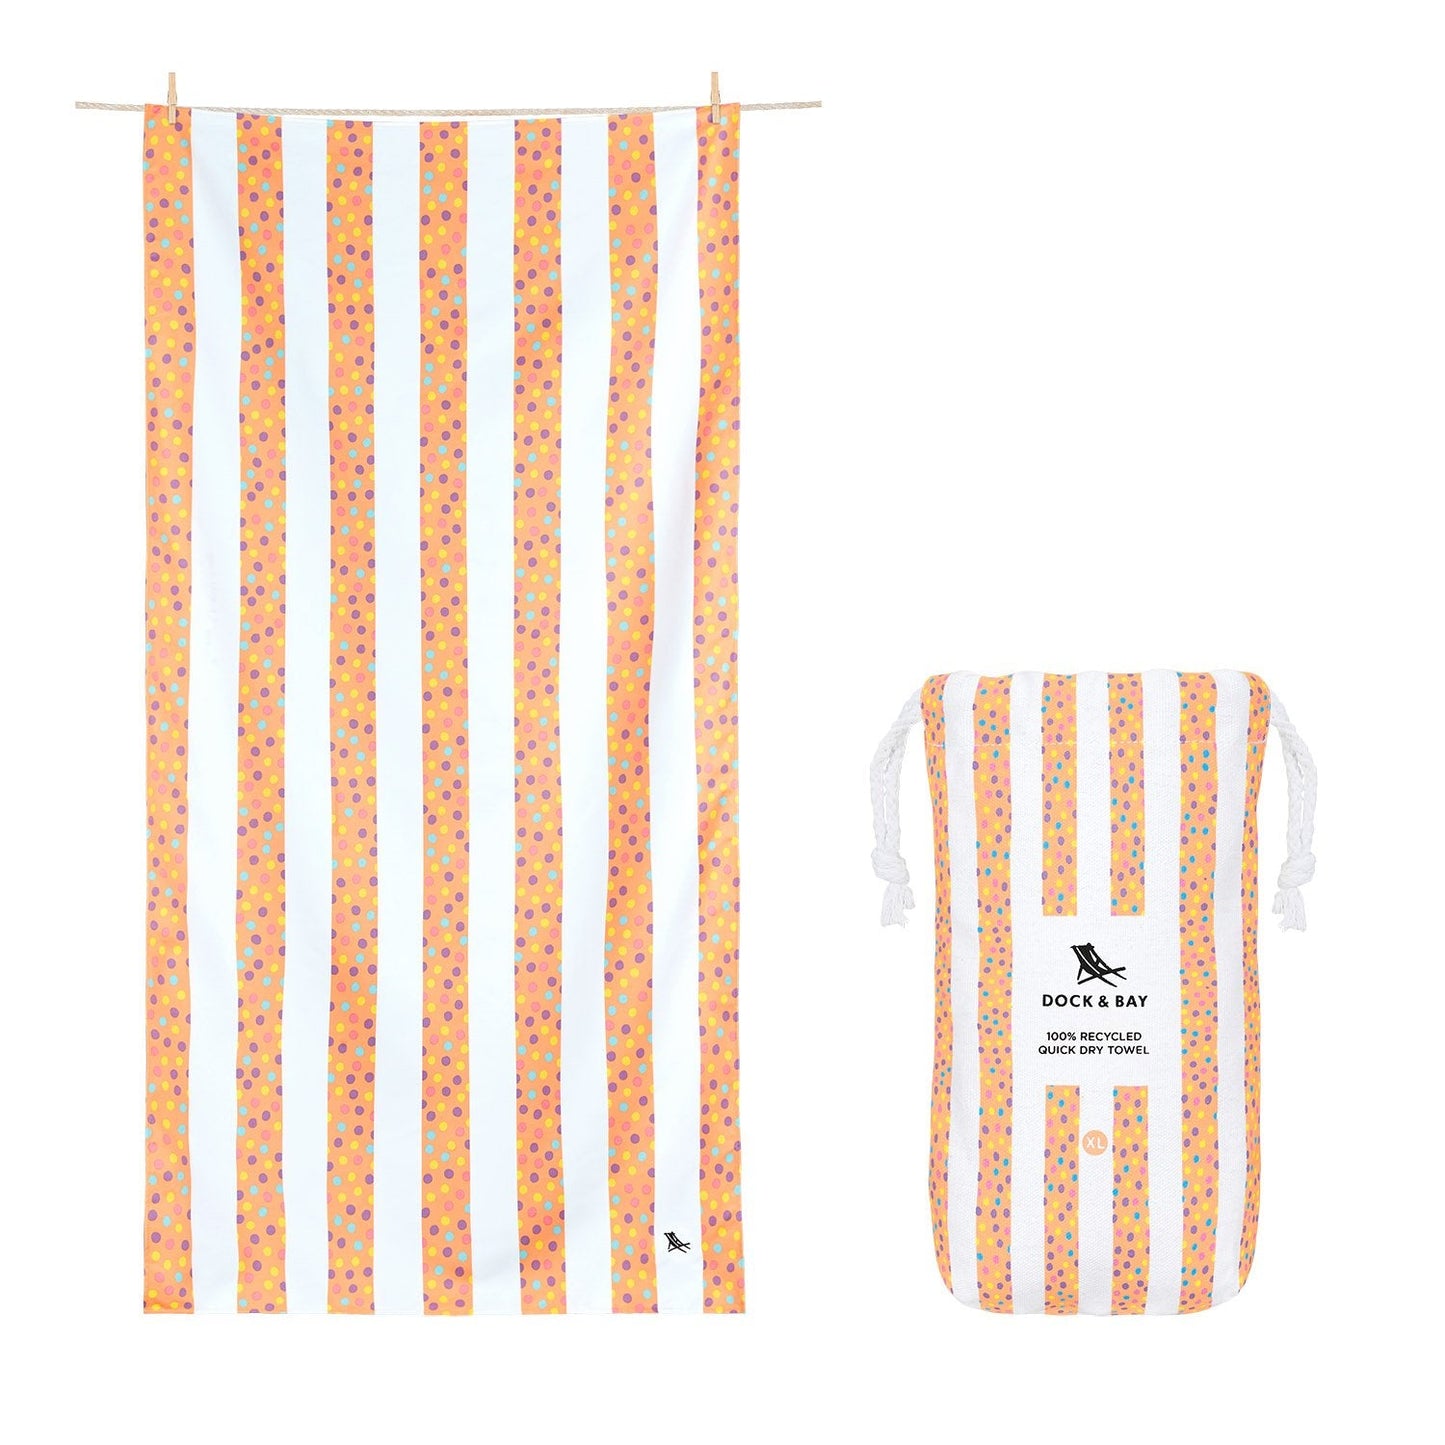 Celebrations Collection XLarge Towel - Hundreds & Thousands Gifts Dock & Bay   